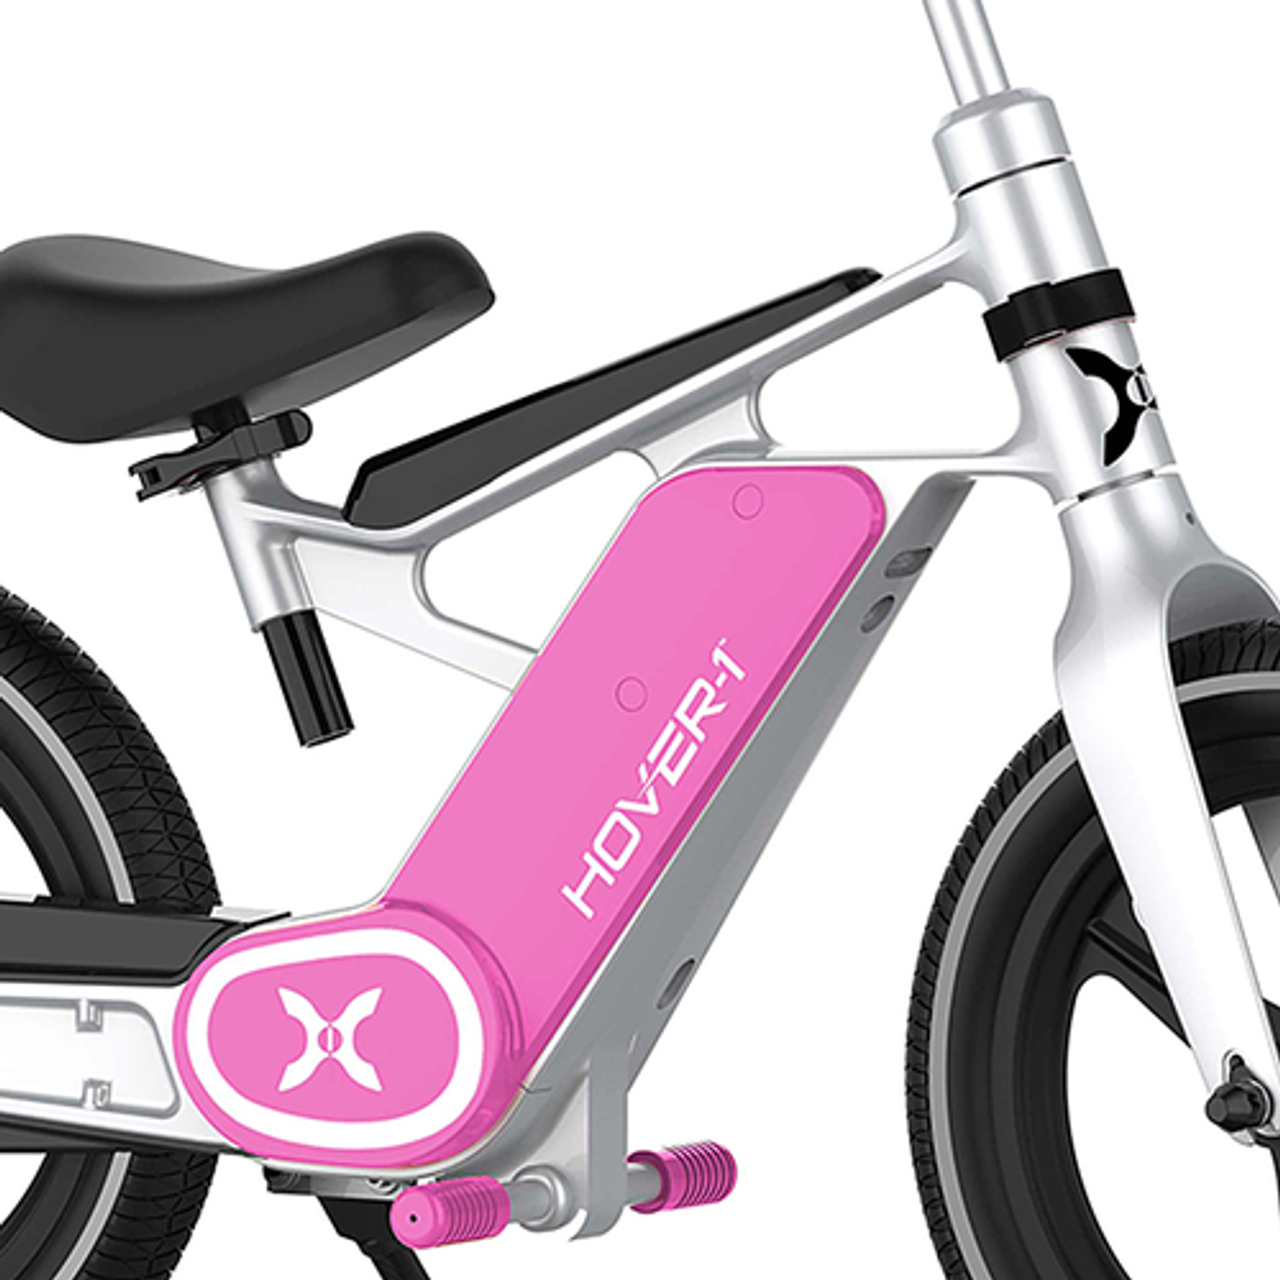 Hover-1 - My 1st E-Bike - Pink